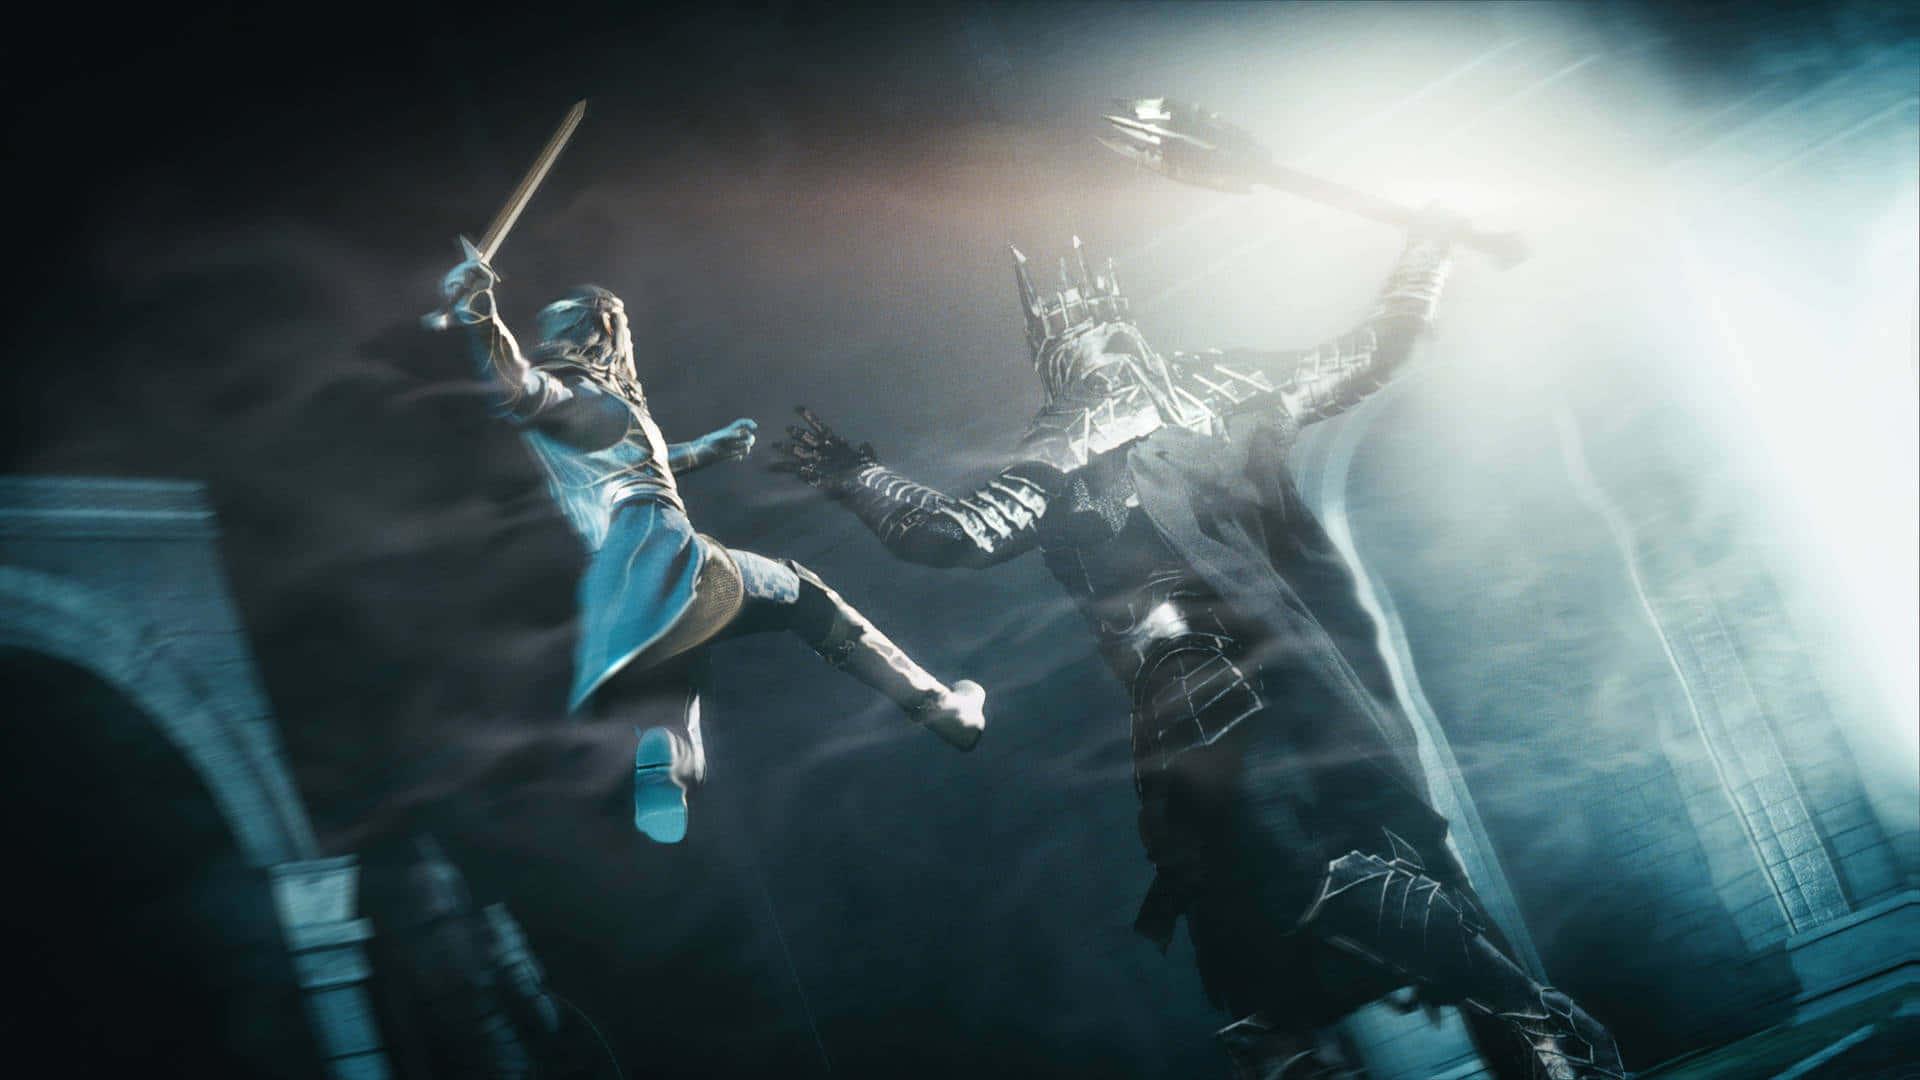 A Man Is Flying Over A Sword And A Woman